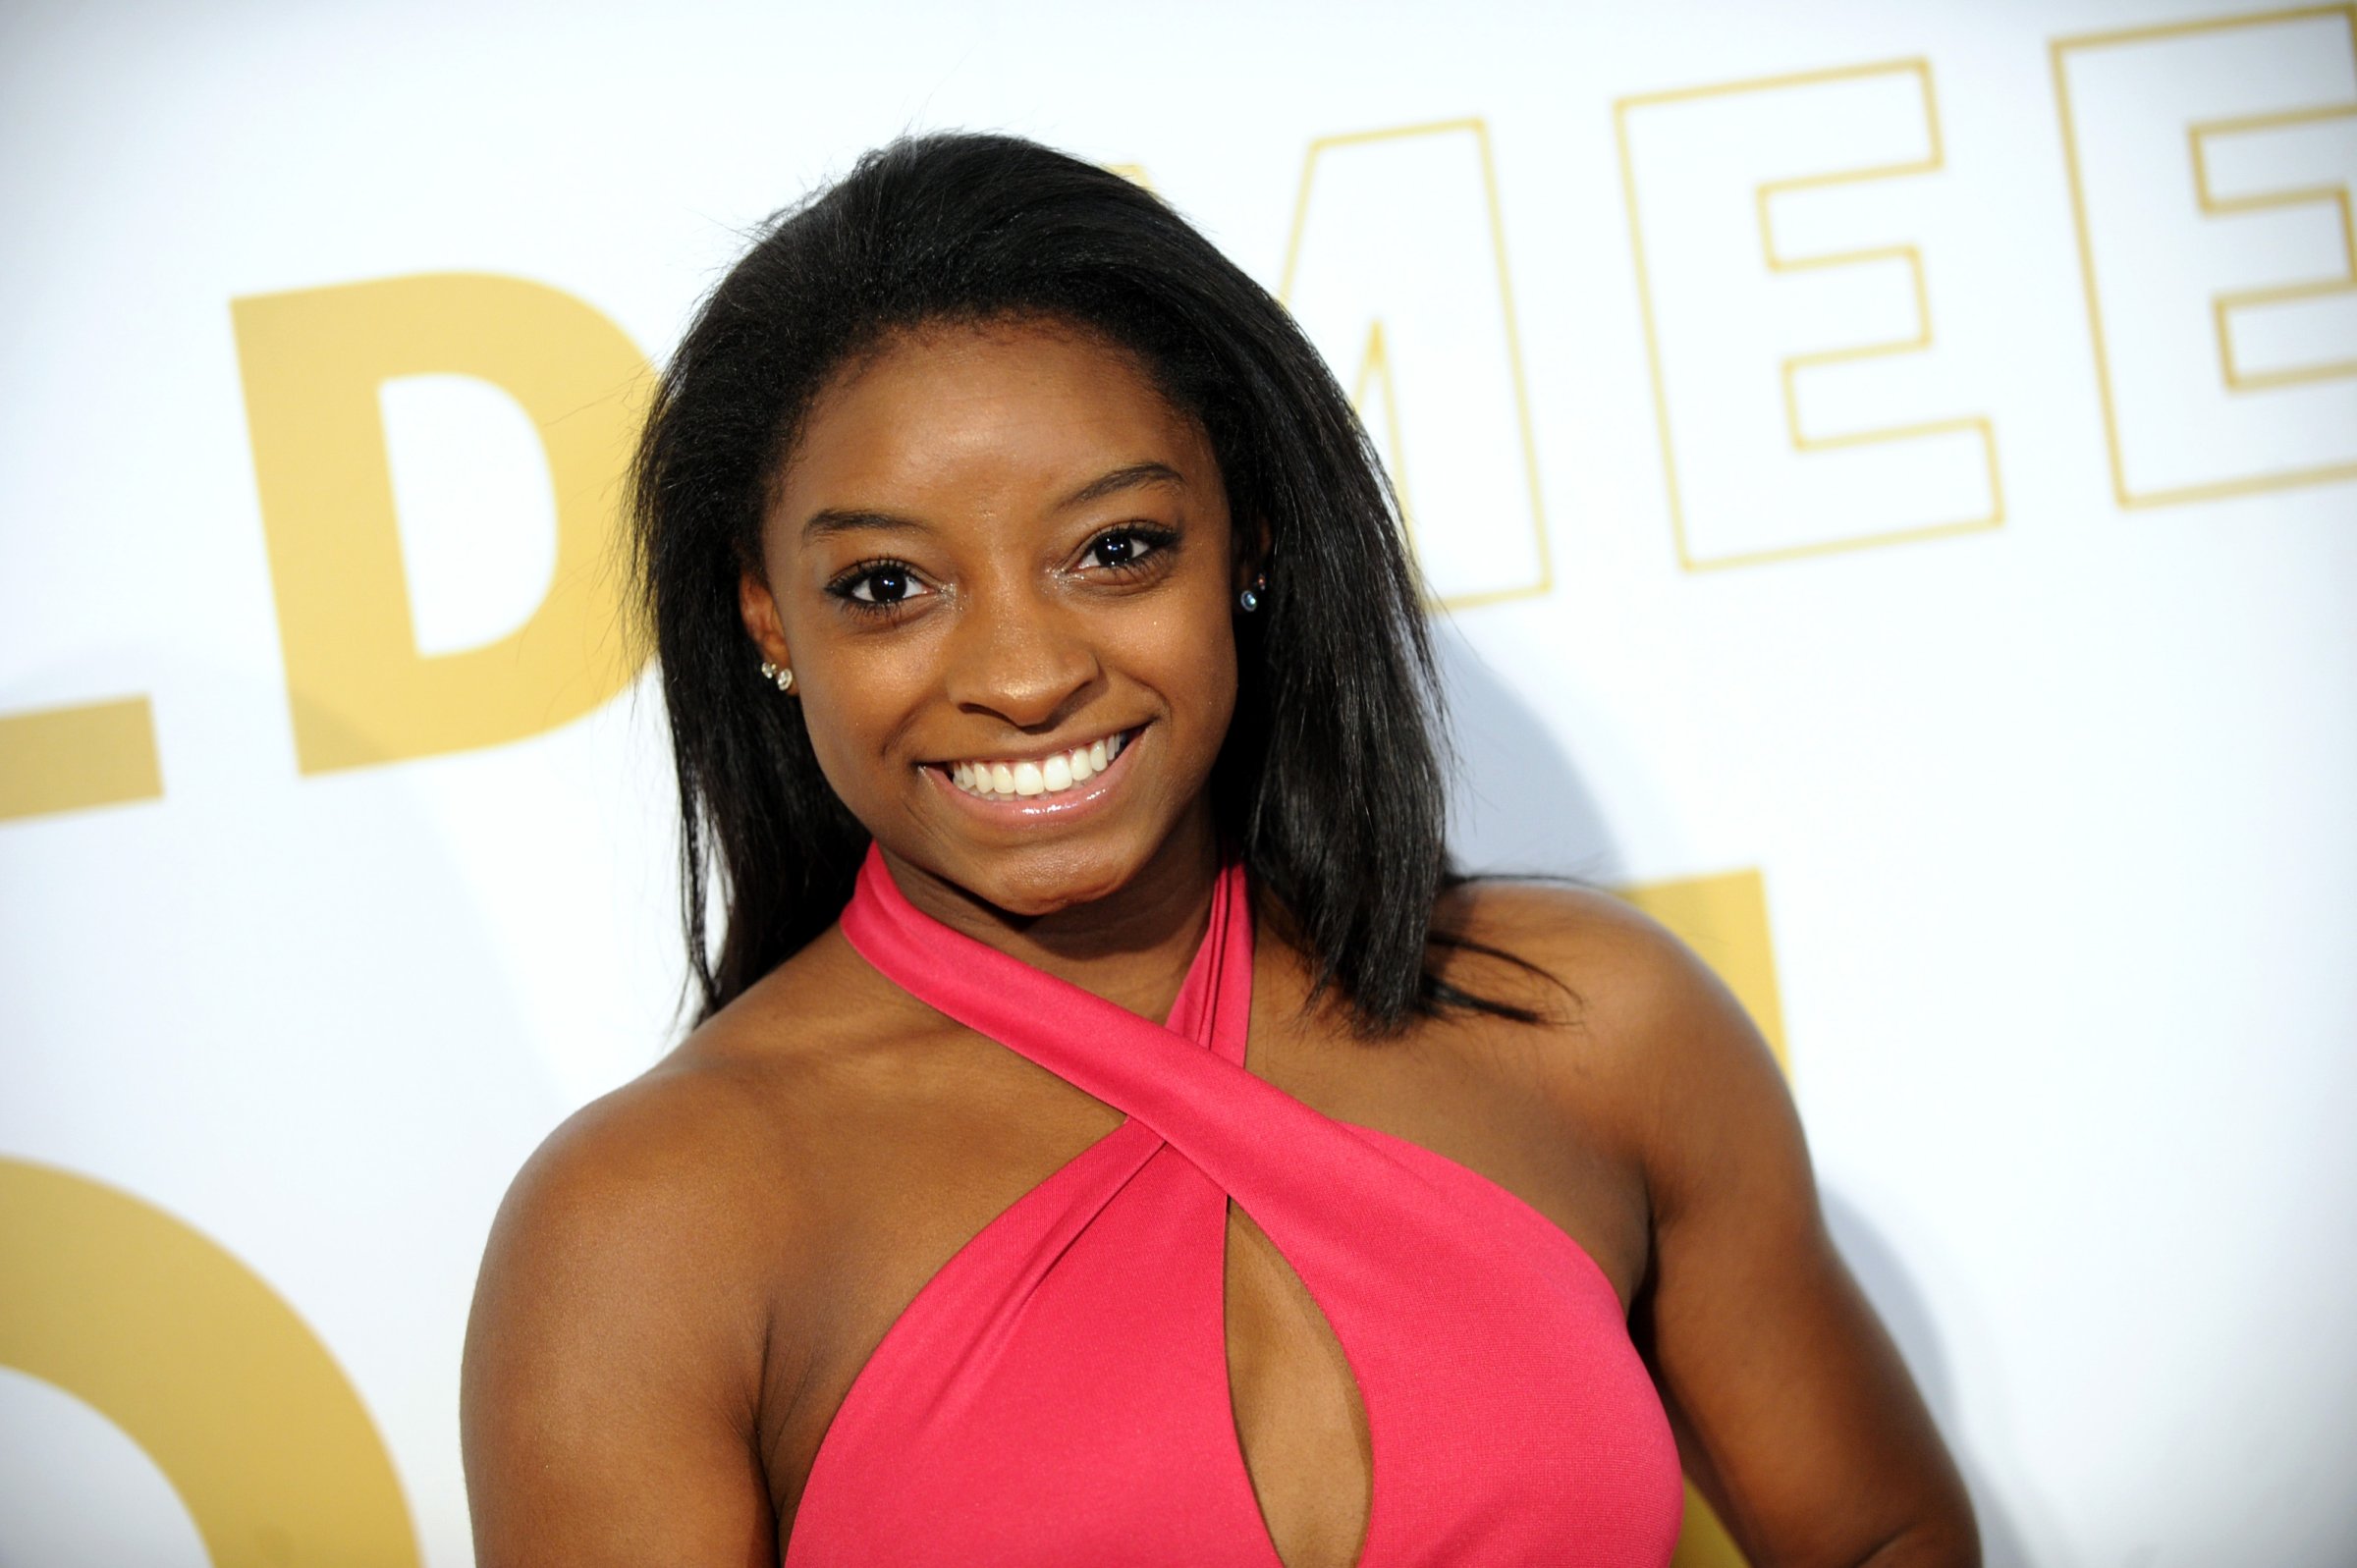 Olympic athlete Simone Biles attends Life is Good at GOLD MEETS GOLDEN Event at Equinox on Jan. 7, 2017 in Los Angeles, Calif.